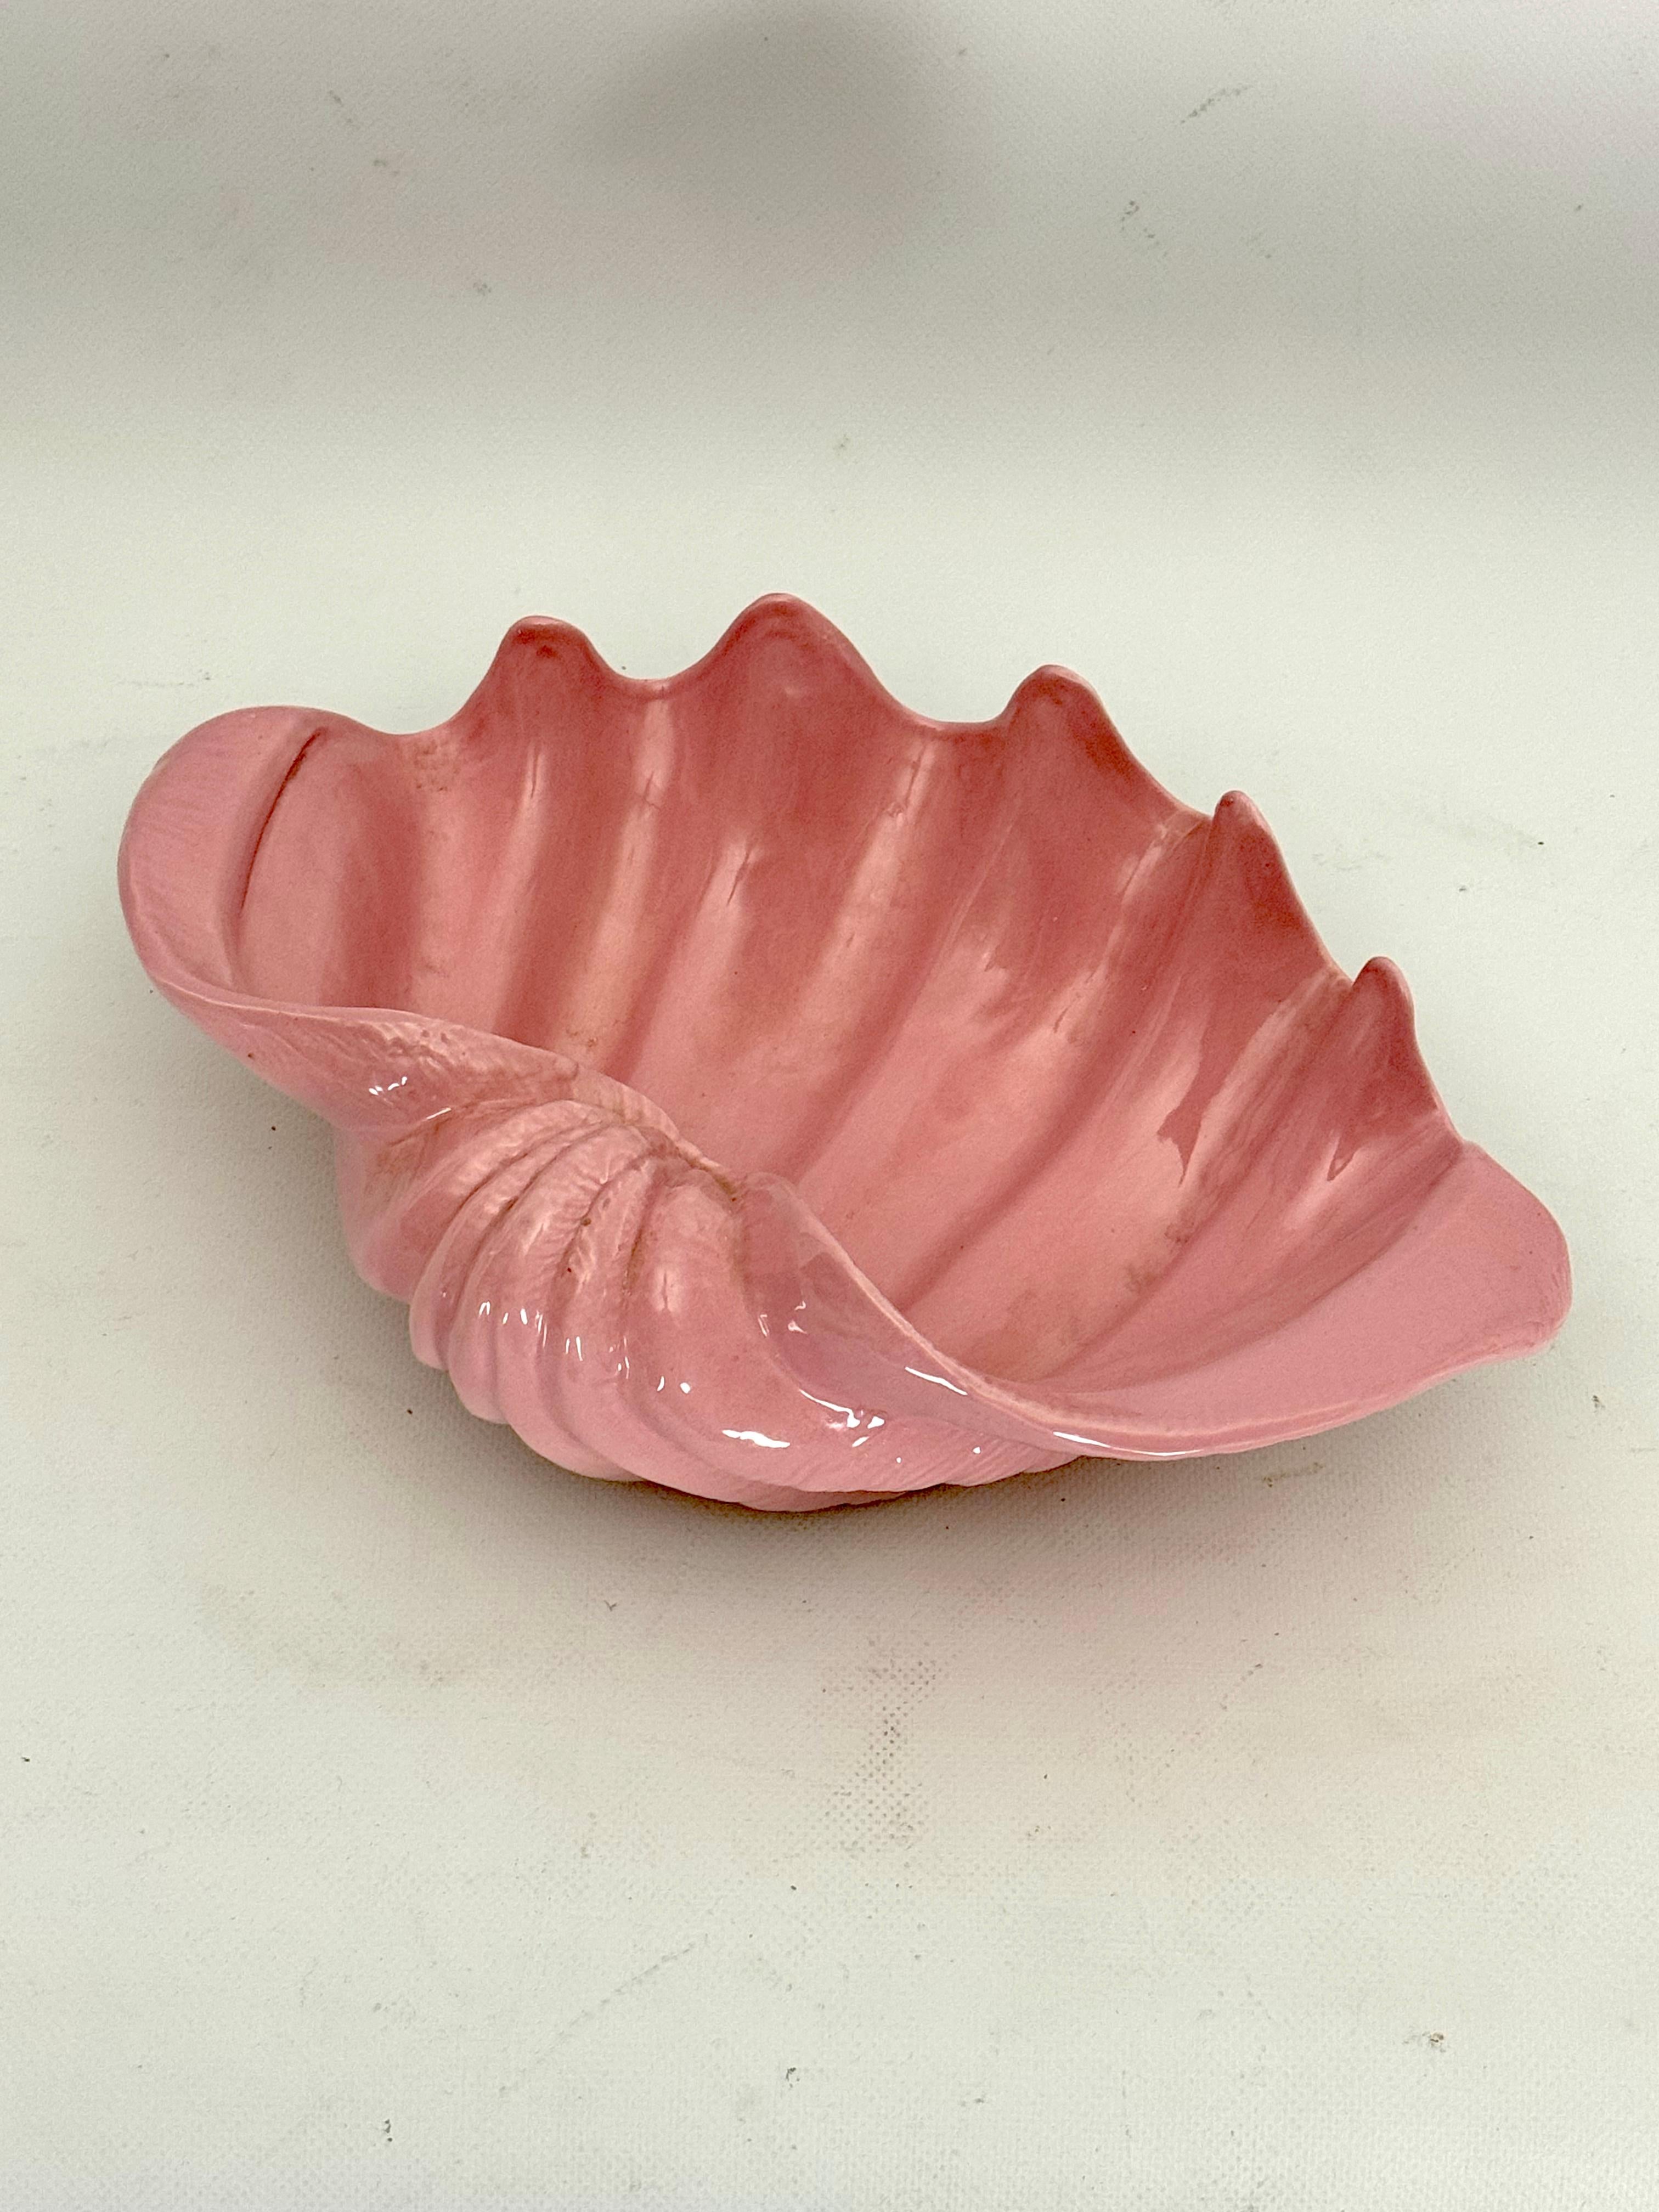 Very good vintage condition with normal trace of age and use for this shell bowl in pink ceramic. Produced in Italy during the 30s.
